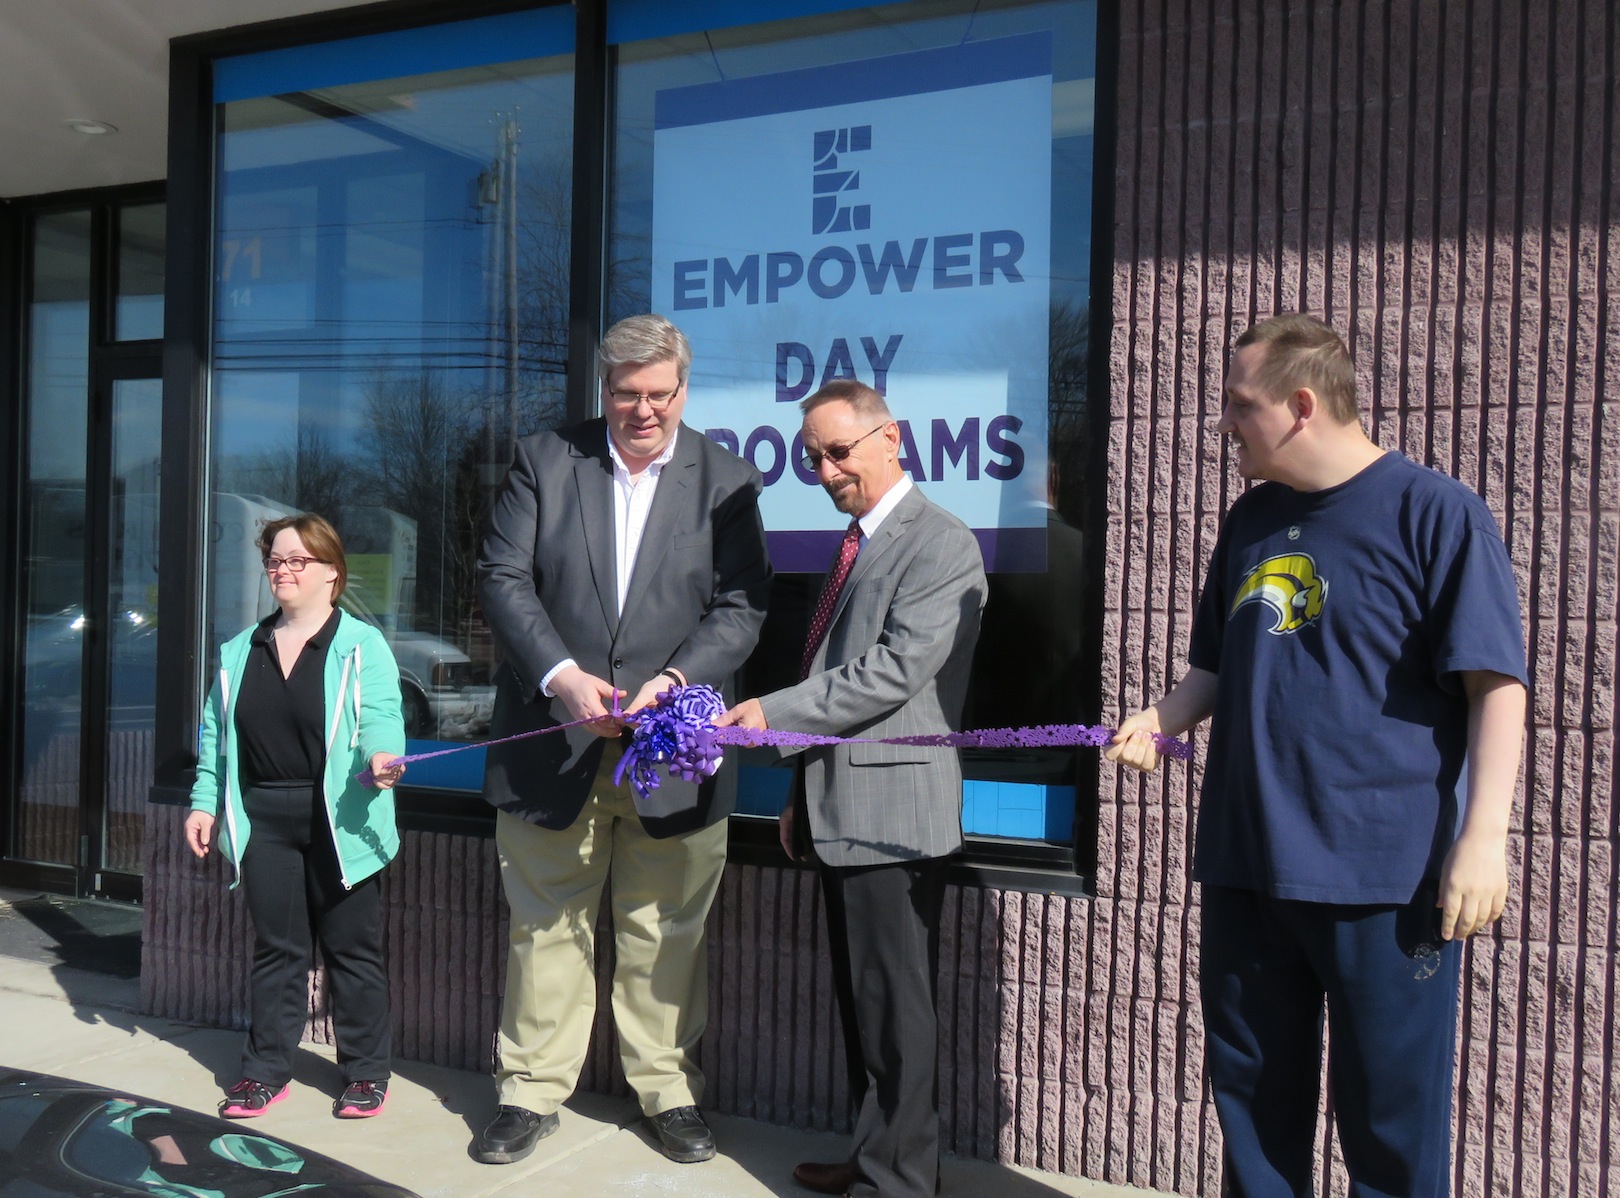 Pictured, from left, Denise Dean, Empower CEO Jeff Paterson, Wheatfield Supervisor Don MacSwan and Kevin Hance cut the ribbon to the Wheatfield facility. (Photo by David Yarger)